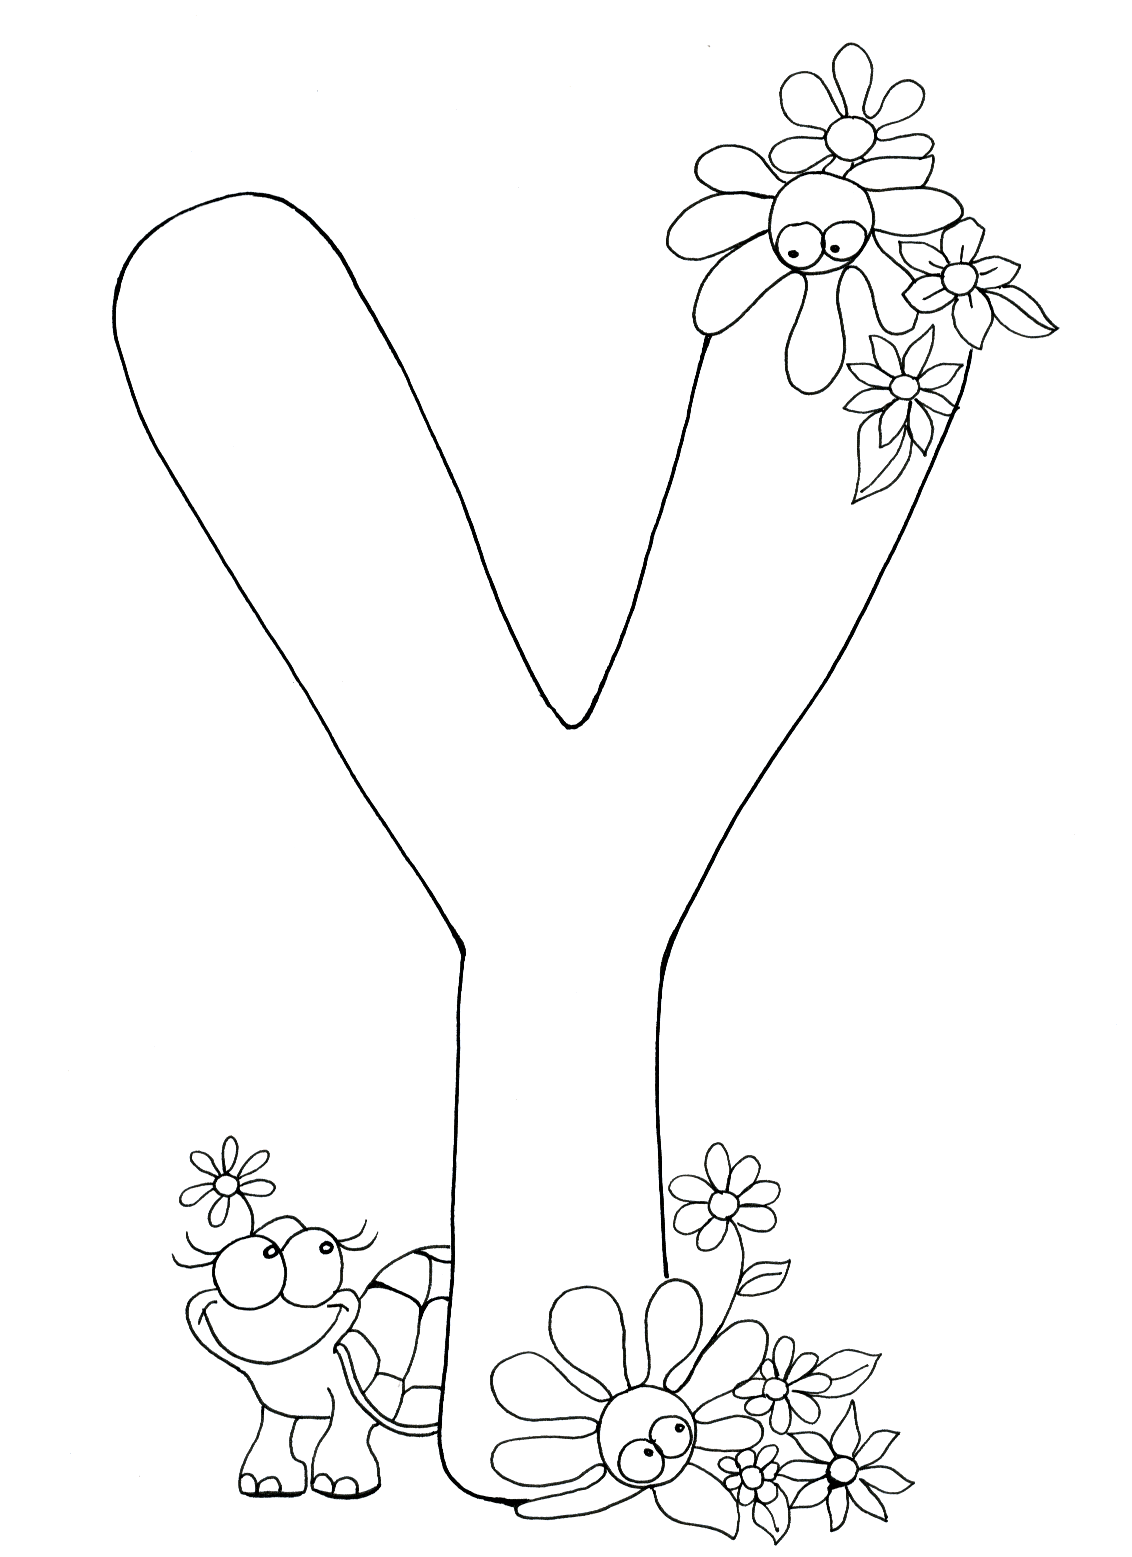 Free kids coloring pages, printable coloring book pages